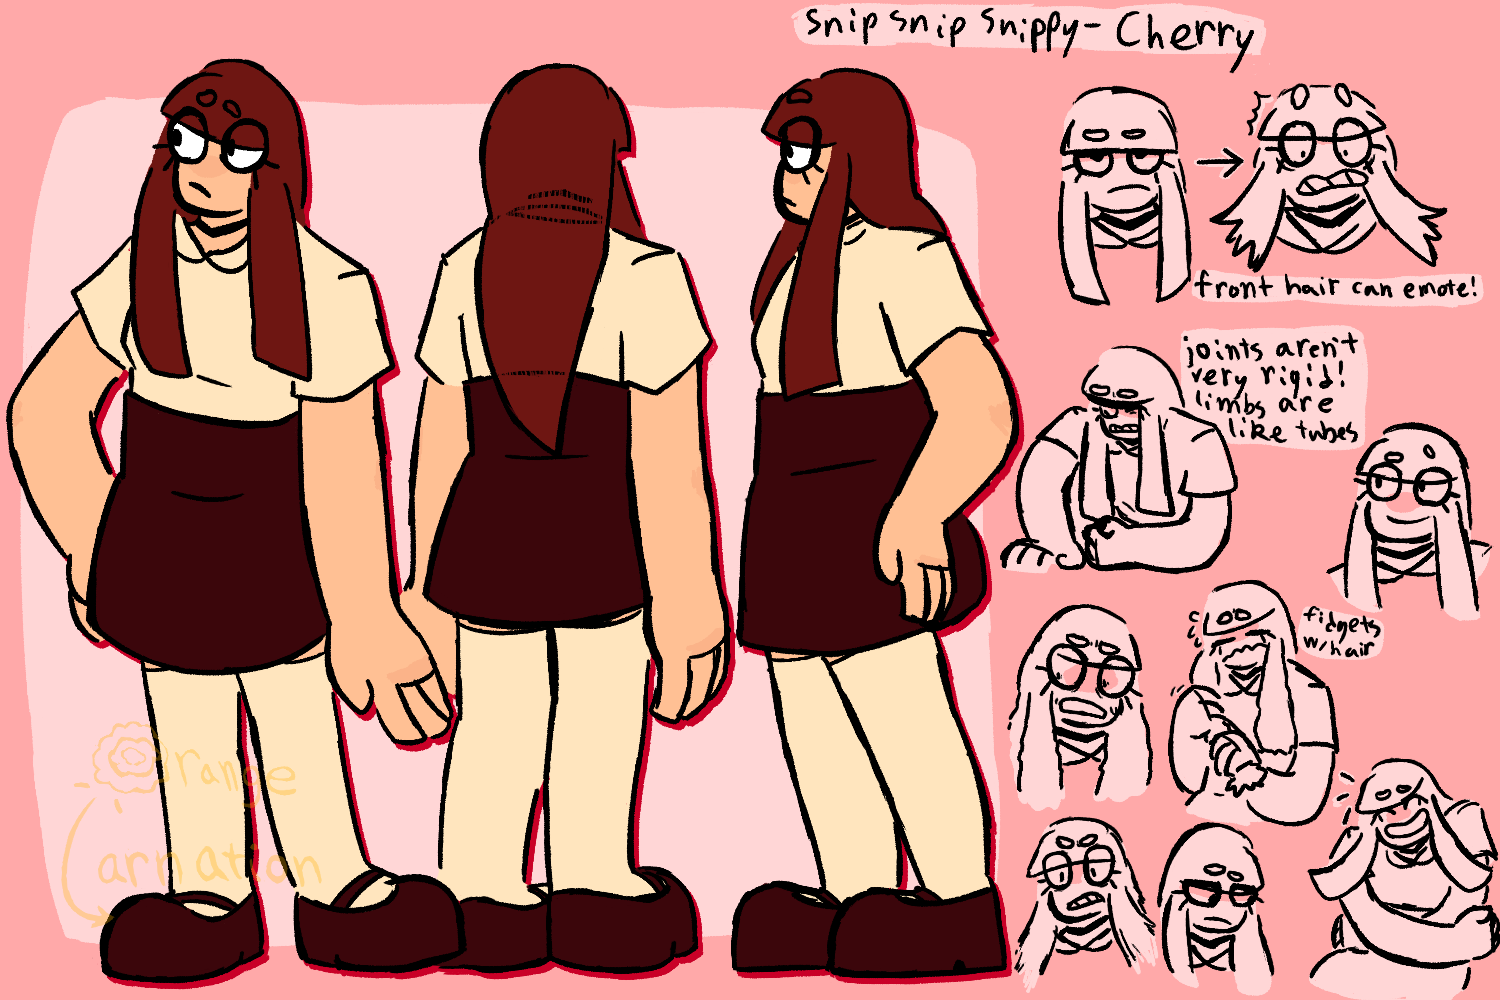 Three full-body drawings of Cherry from Snip Snip Snippy, for reference purposes.  In order, she is facing forward with a hand on her hip and one down to her side, facing away with her hands down and a faint x-ray of her clothes beneath her long hair, and facing to the left with her hand on her hip, all with a neutral expression.    She is a young woman with light skin, long red hair, bangs covering her whole forehead, a simple black choker, a cream colored short-sleeve shirt with a Peter Pan style collar, a dark red skirt that comes up to just below her chest and goes halfway down her thighs, cream colored thigh-high socks, and dark red Mary Jane shoes.  At the top and to the right is text that reads 'Snip Snip Snippy- Cherry.'  Beneath that is nine different lineart-only drawings of Cherry making different expressions and poses with various notes.  They are as follows, left-to-right, top-to-bottom.  A headshot of her making a bored expression, with an arrow pointing to a headshot of her making an exaggerated shocked expression, the blocky strands of hair in front of her shoulders flying upwards and looking frayed at the ends, with a note beneath reading 'front hair can emote!'  Cherry on the ground with a slightly hurt expression, propping herself up on one elbow and pushing up off the ground with her other hand, with a note reading 'Joints aren't very rigid!  Limbs are like tubes.'  A headshot of her looking off to the side with a smile and one raised eyebrow.  A headshot of her with a frightened expression, eyes and mouth wide, sweating slightly, brows furrowed, and hair wiggly.  A waist-up shot of her looking nervous and holding one of her front strands of hair in both hands, with a note reading 'fidgets with hair.'  A headshot of her looking furious, teeth gritted, hair bushing up slightly.  A headshot of her making a sad expression, looking down and to the side, hair falling straight down.  A waist-up shot of her laughing, front hair curling up and to either side, wrapping her arms around her front.